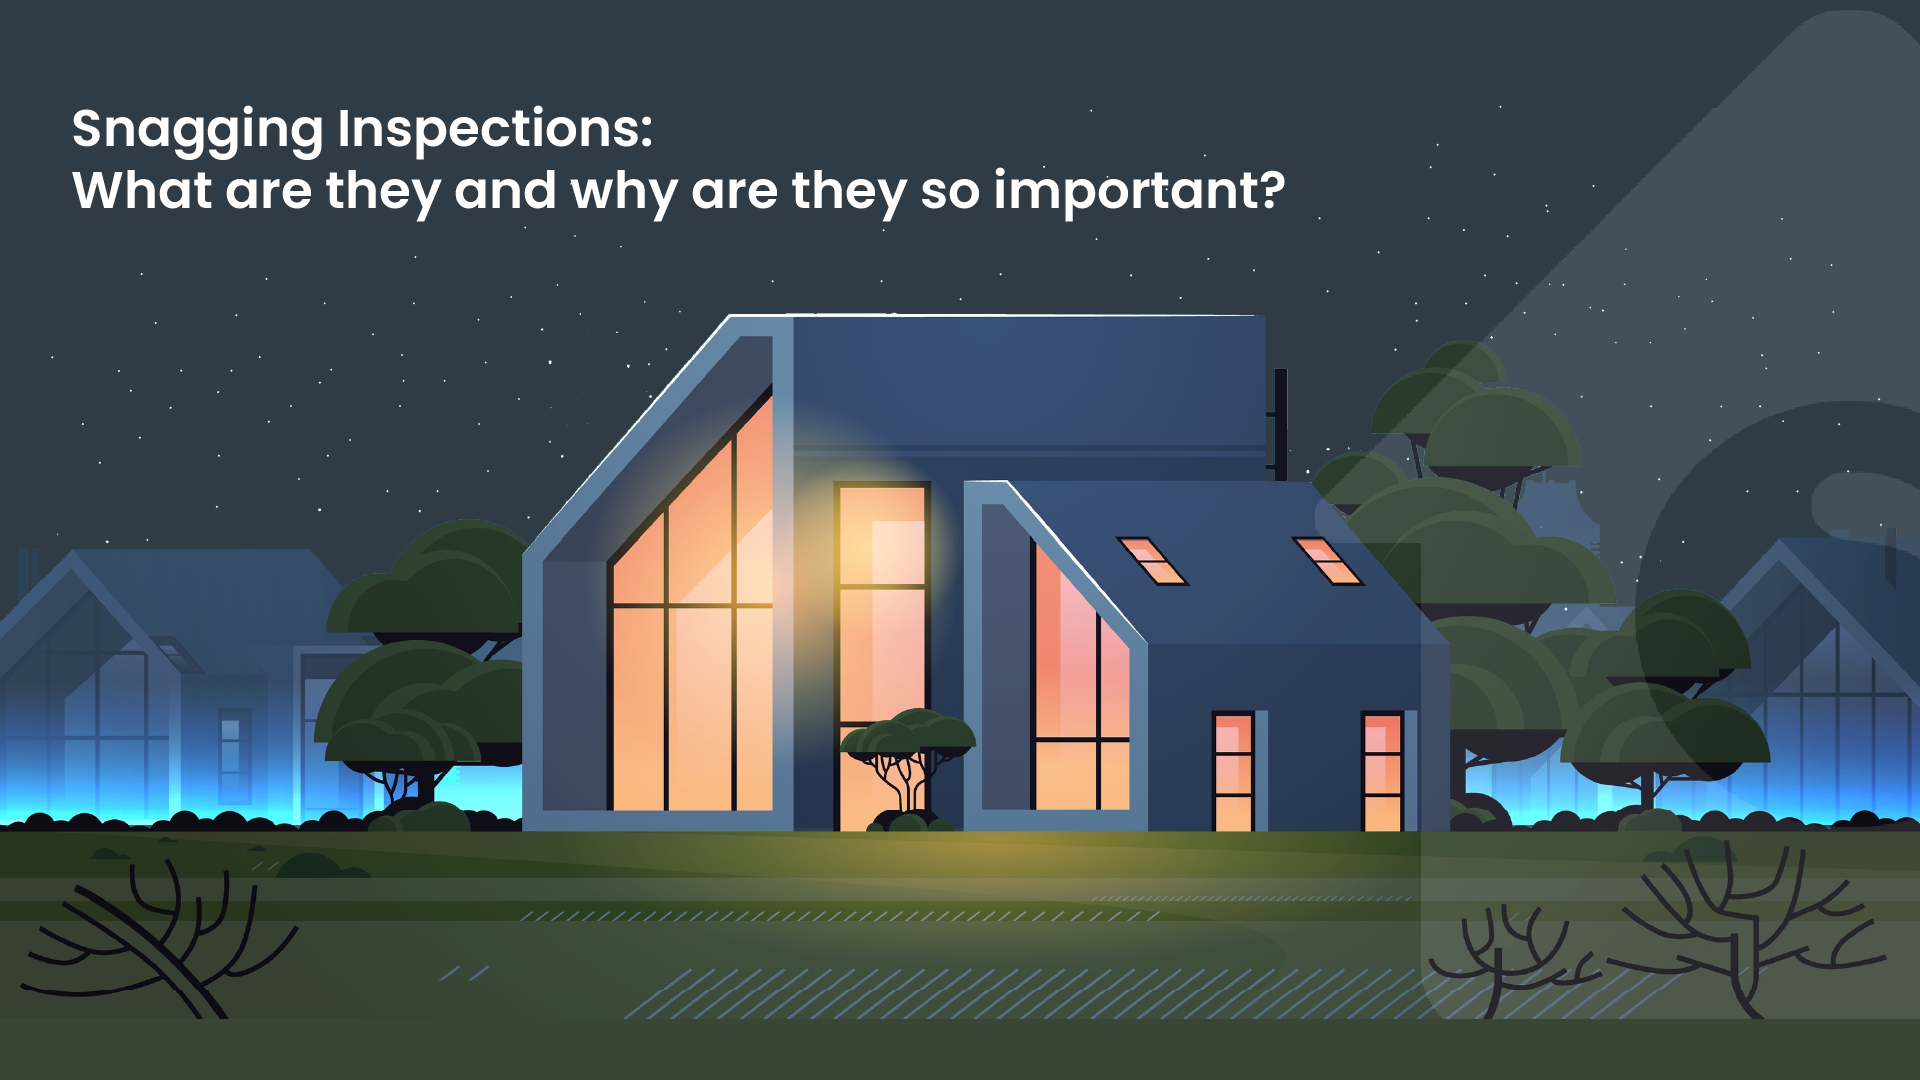 Snagging Inspections: What are they and why are they so important?